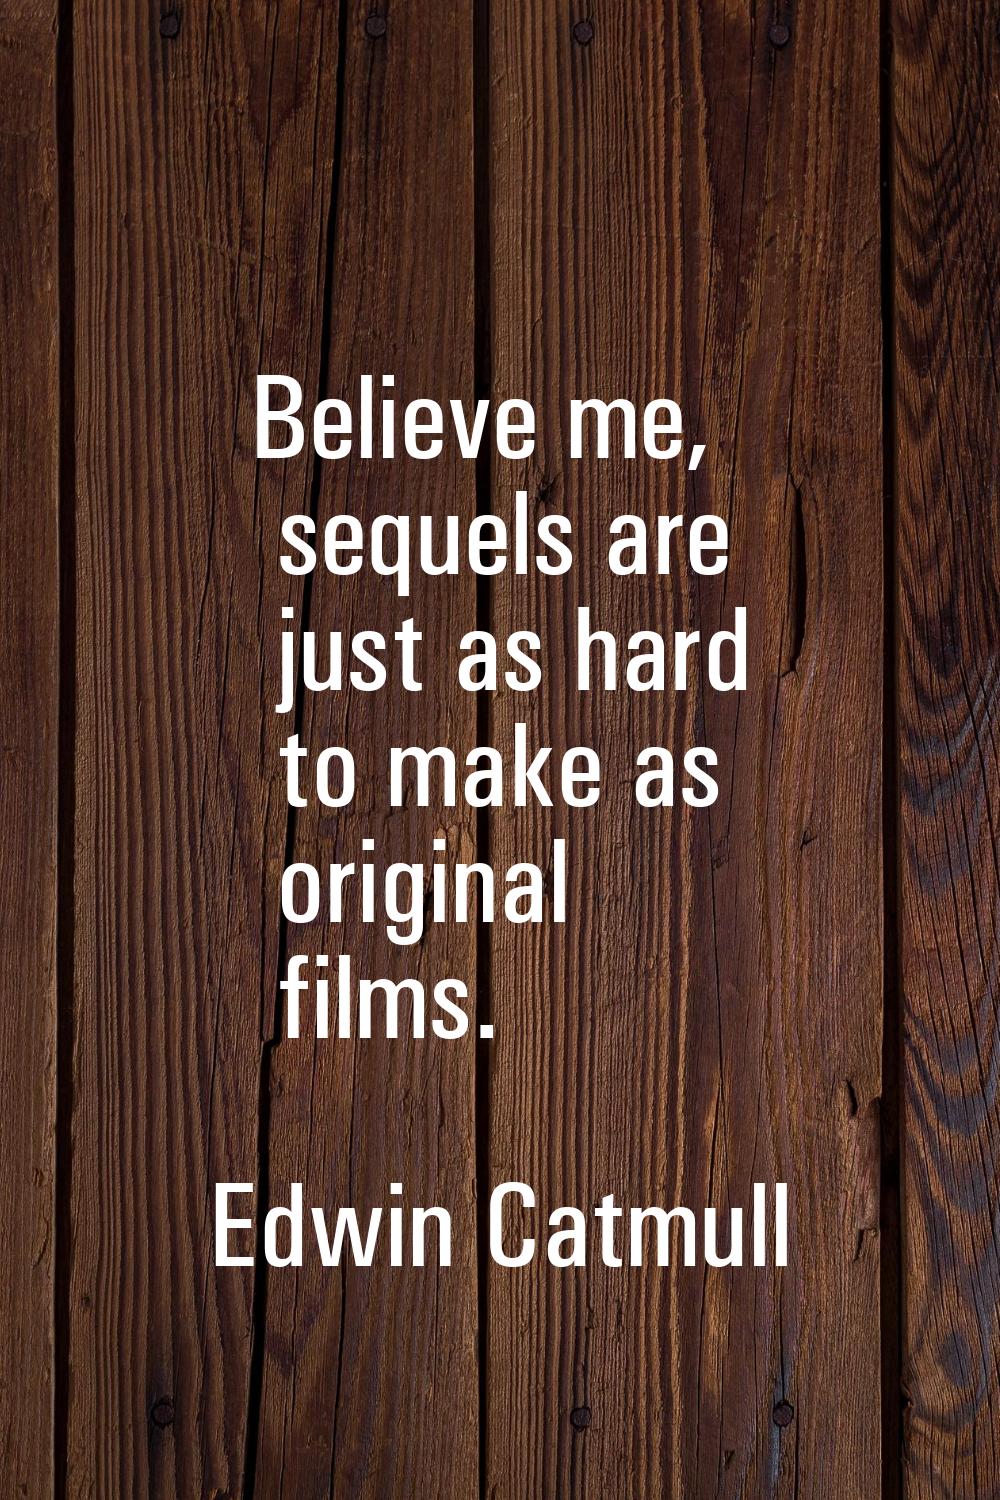 Believe me, sequels are just as hard to make as original films.